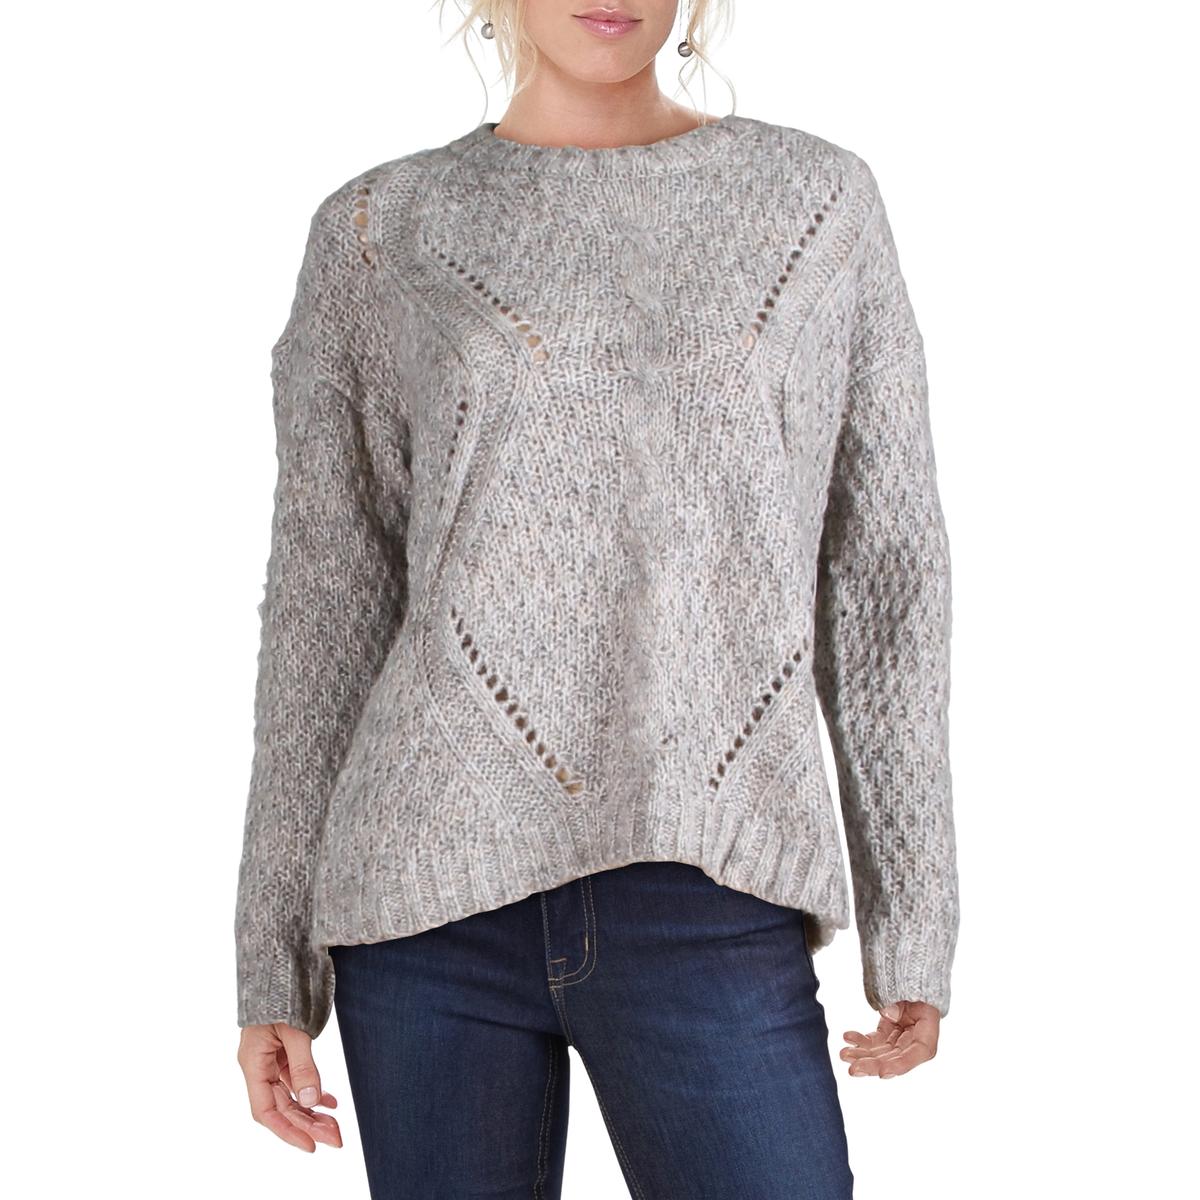 Rd Style Womens Taupe Cable Knit Crewneck Shirt Sweater Top L 8246 for ...